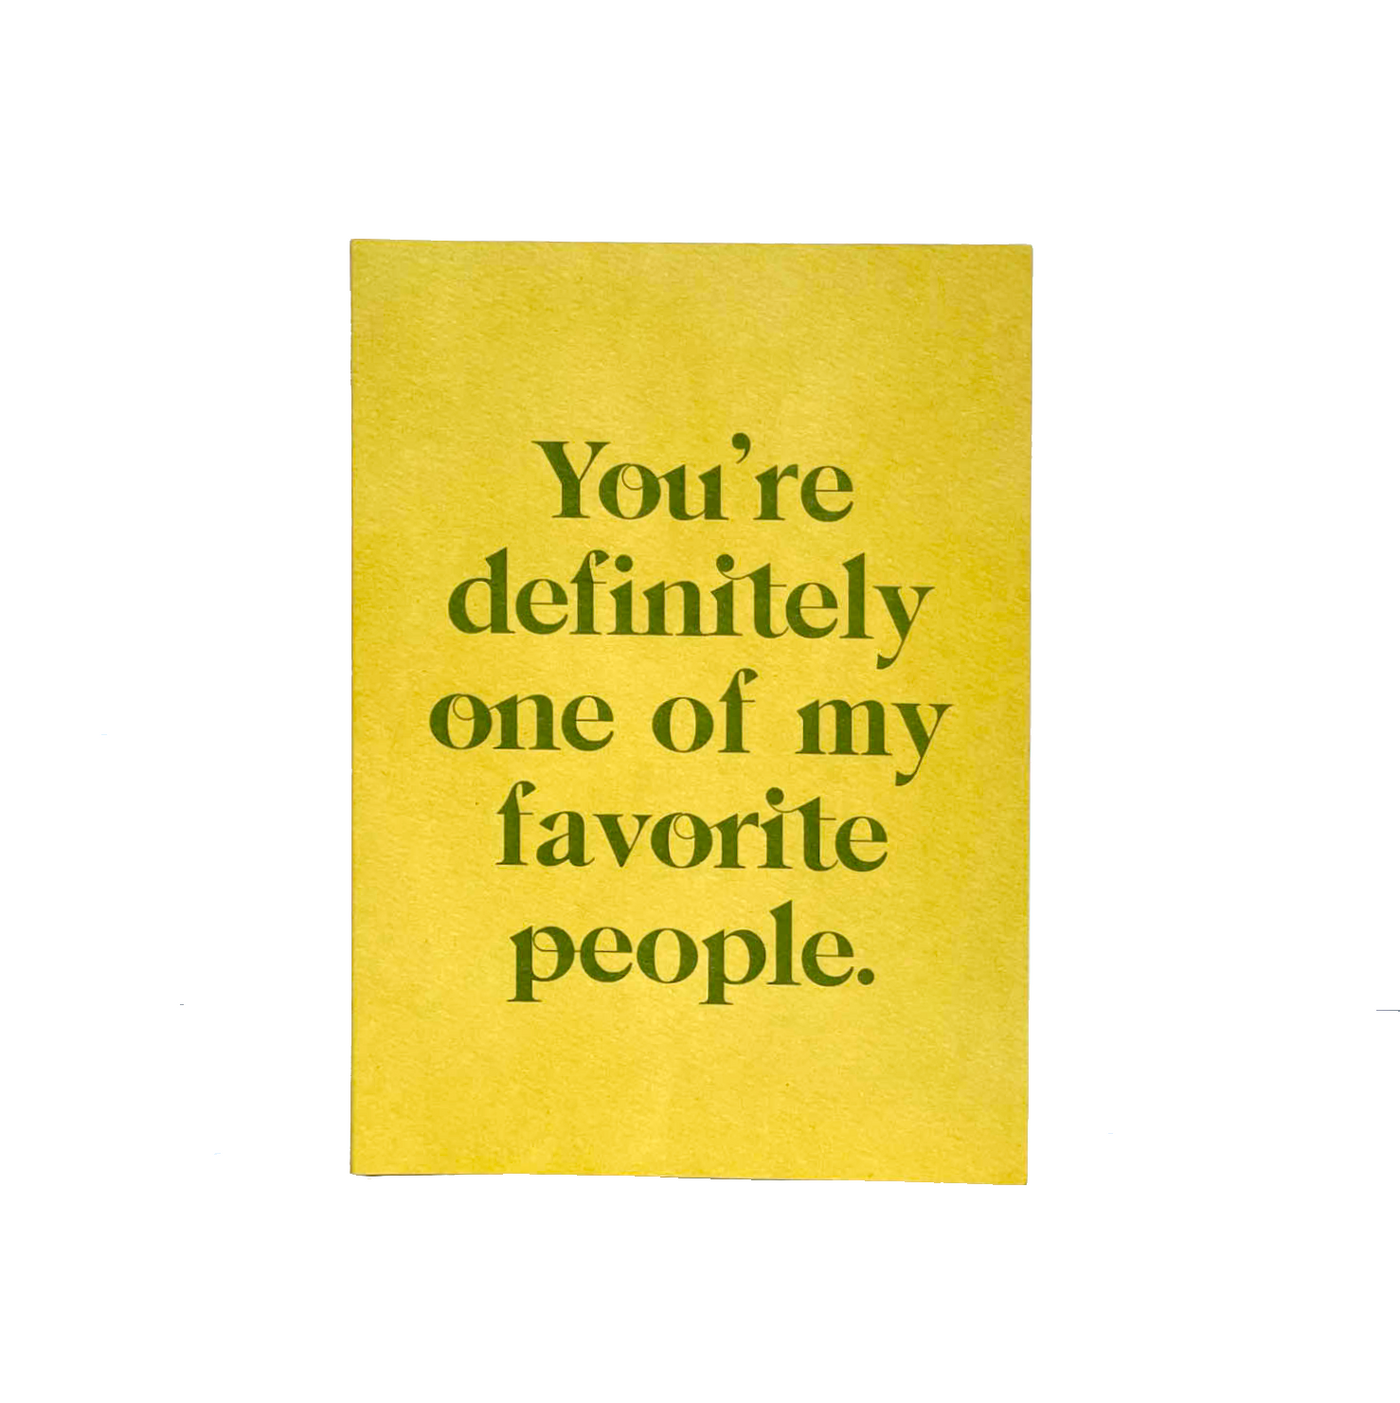 vibrant yellow favorite person greeting card that reads "You're definitely one of my favorite people." on the cover in green text.